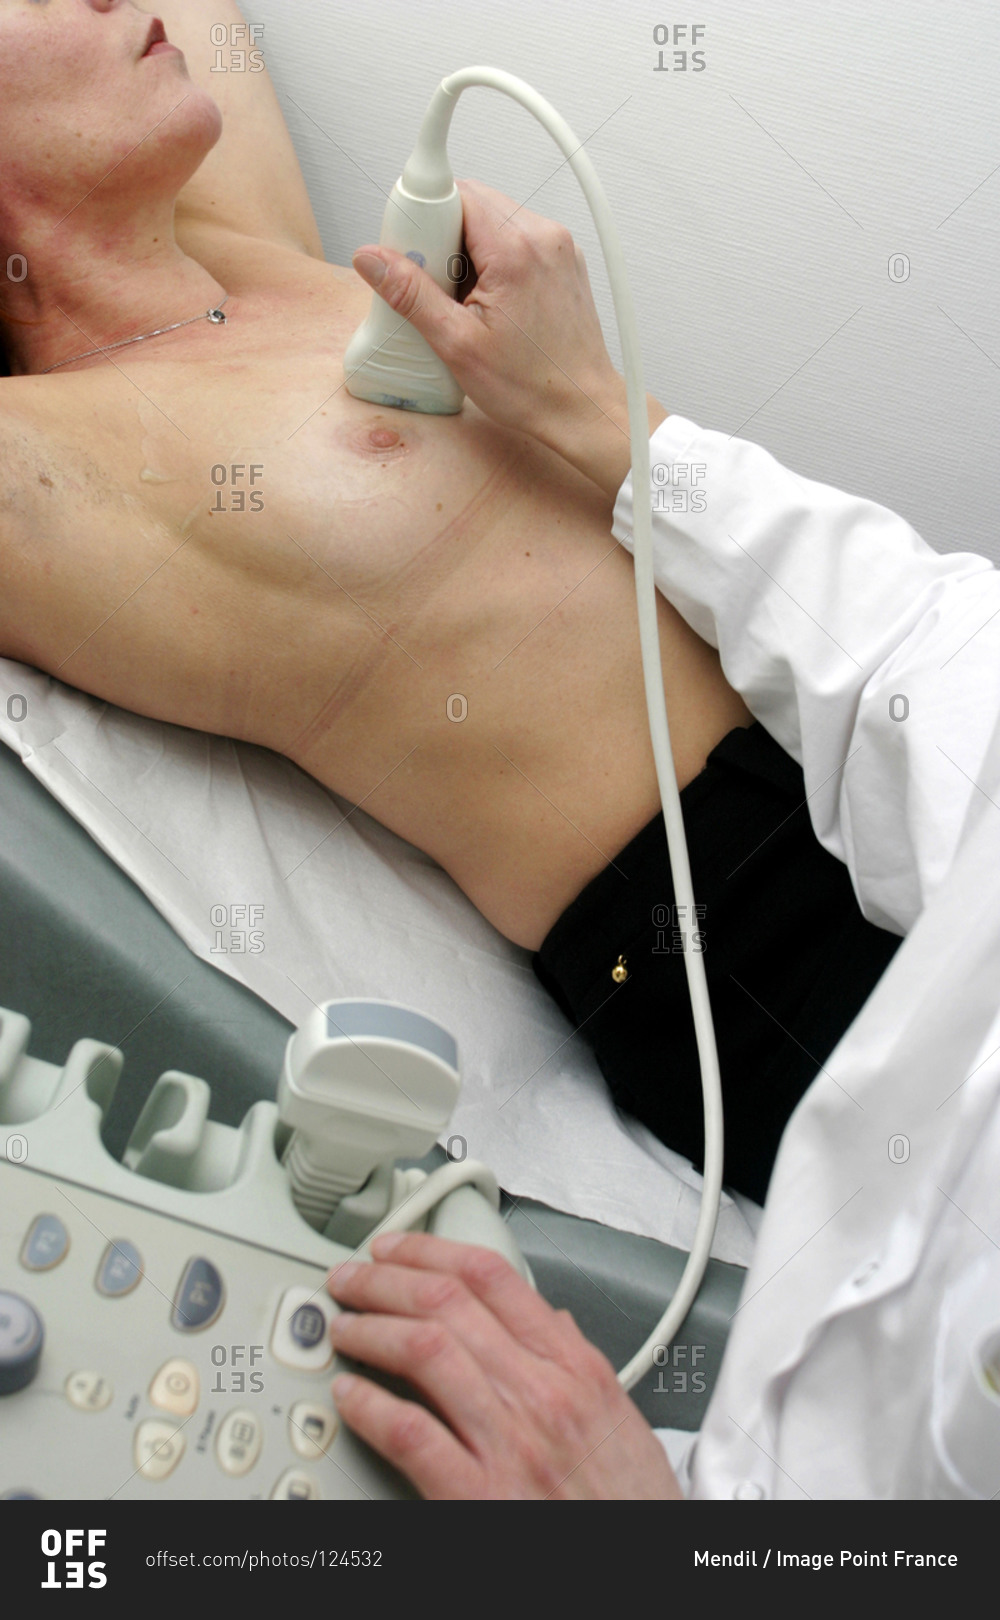 Woman undergoing a breast ultrasound examination in radiology room.